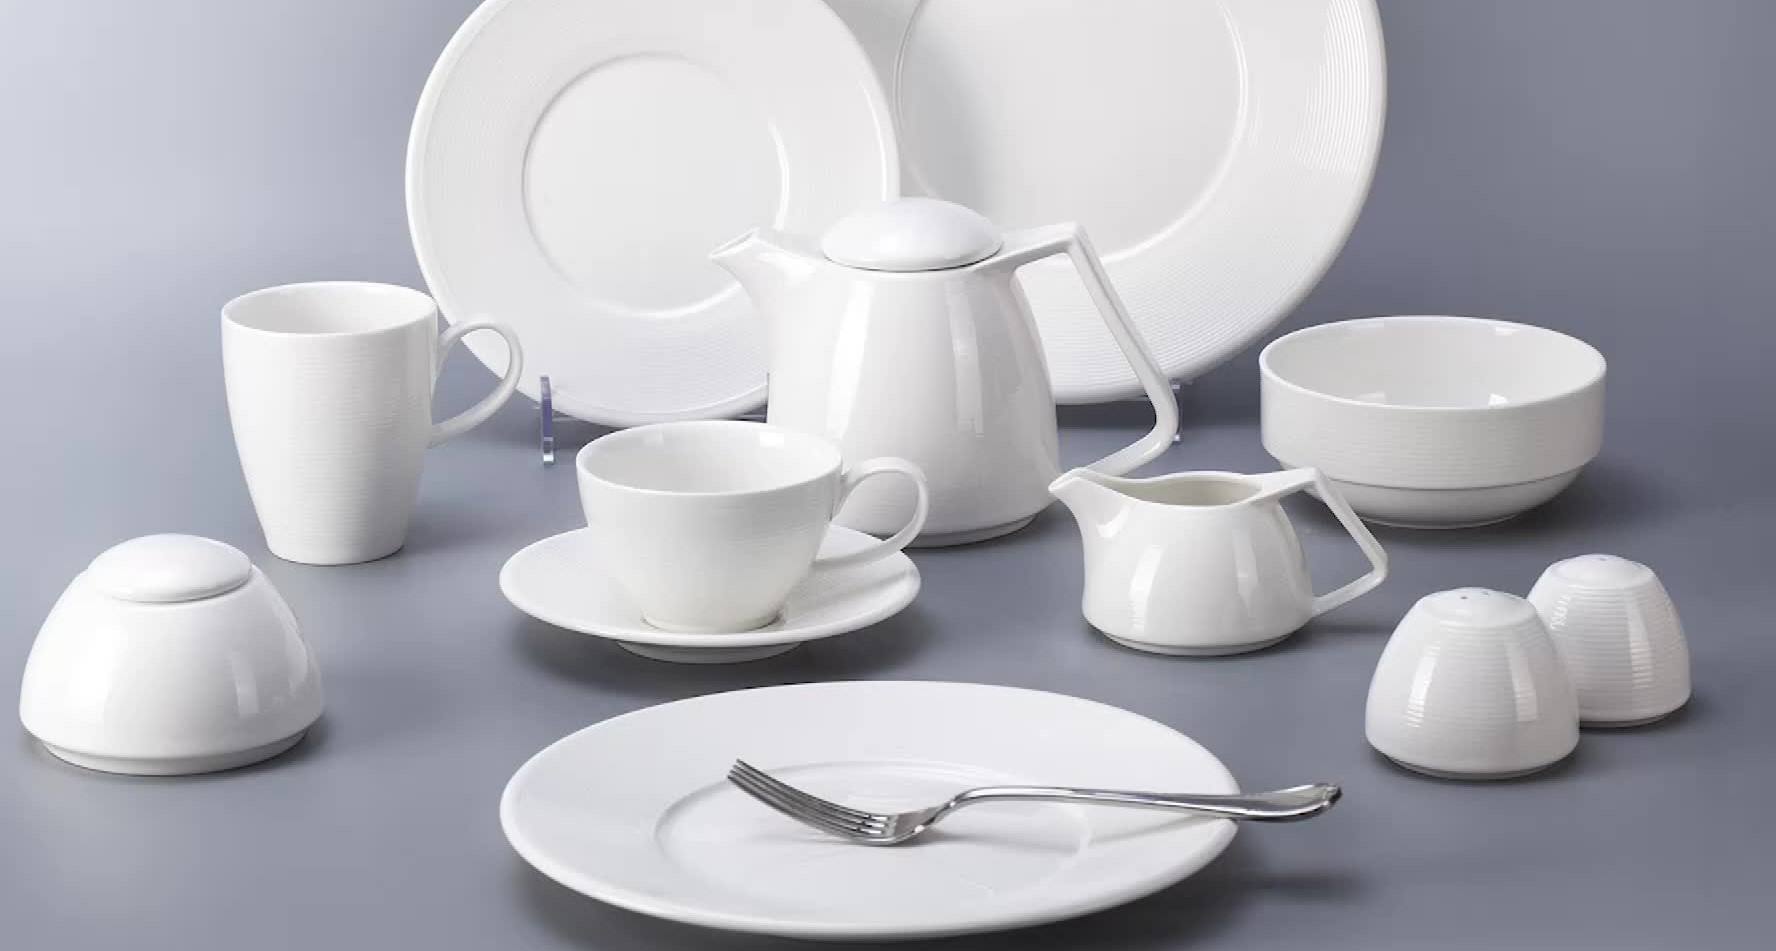 Buy casual porcelain + Introduce The Production And Distribution Factory - Arad  Branding